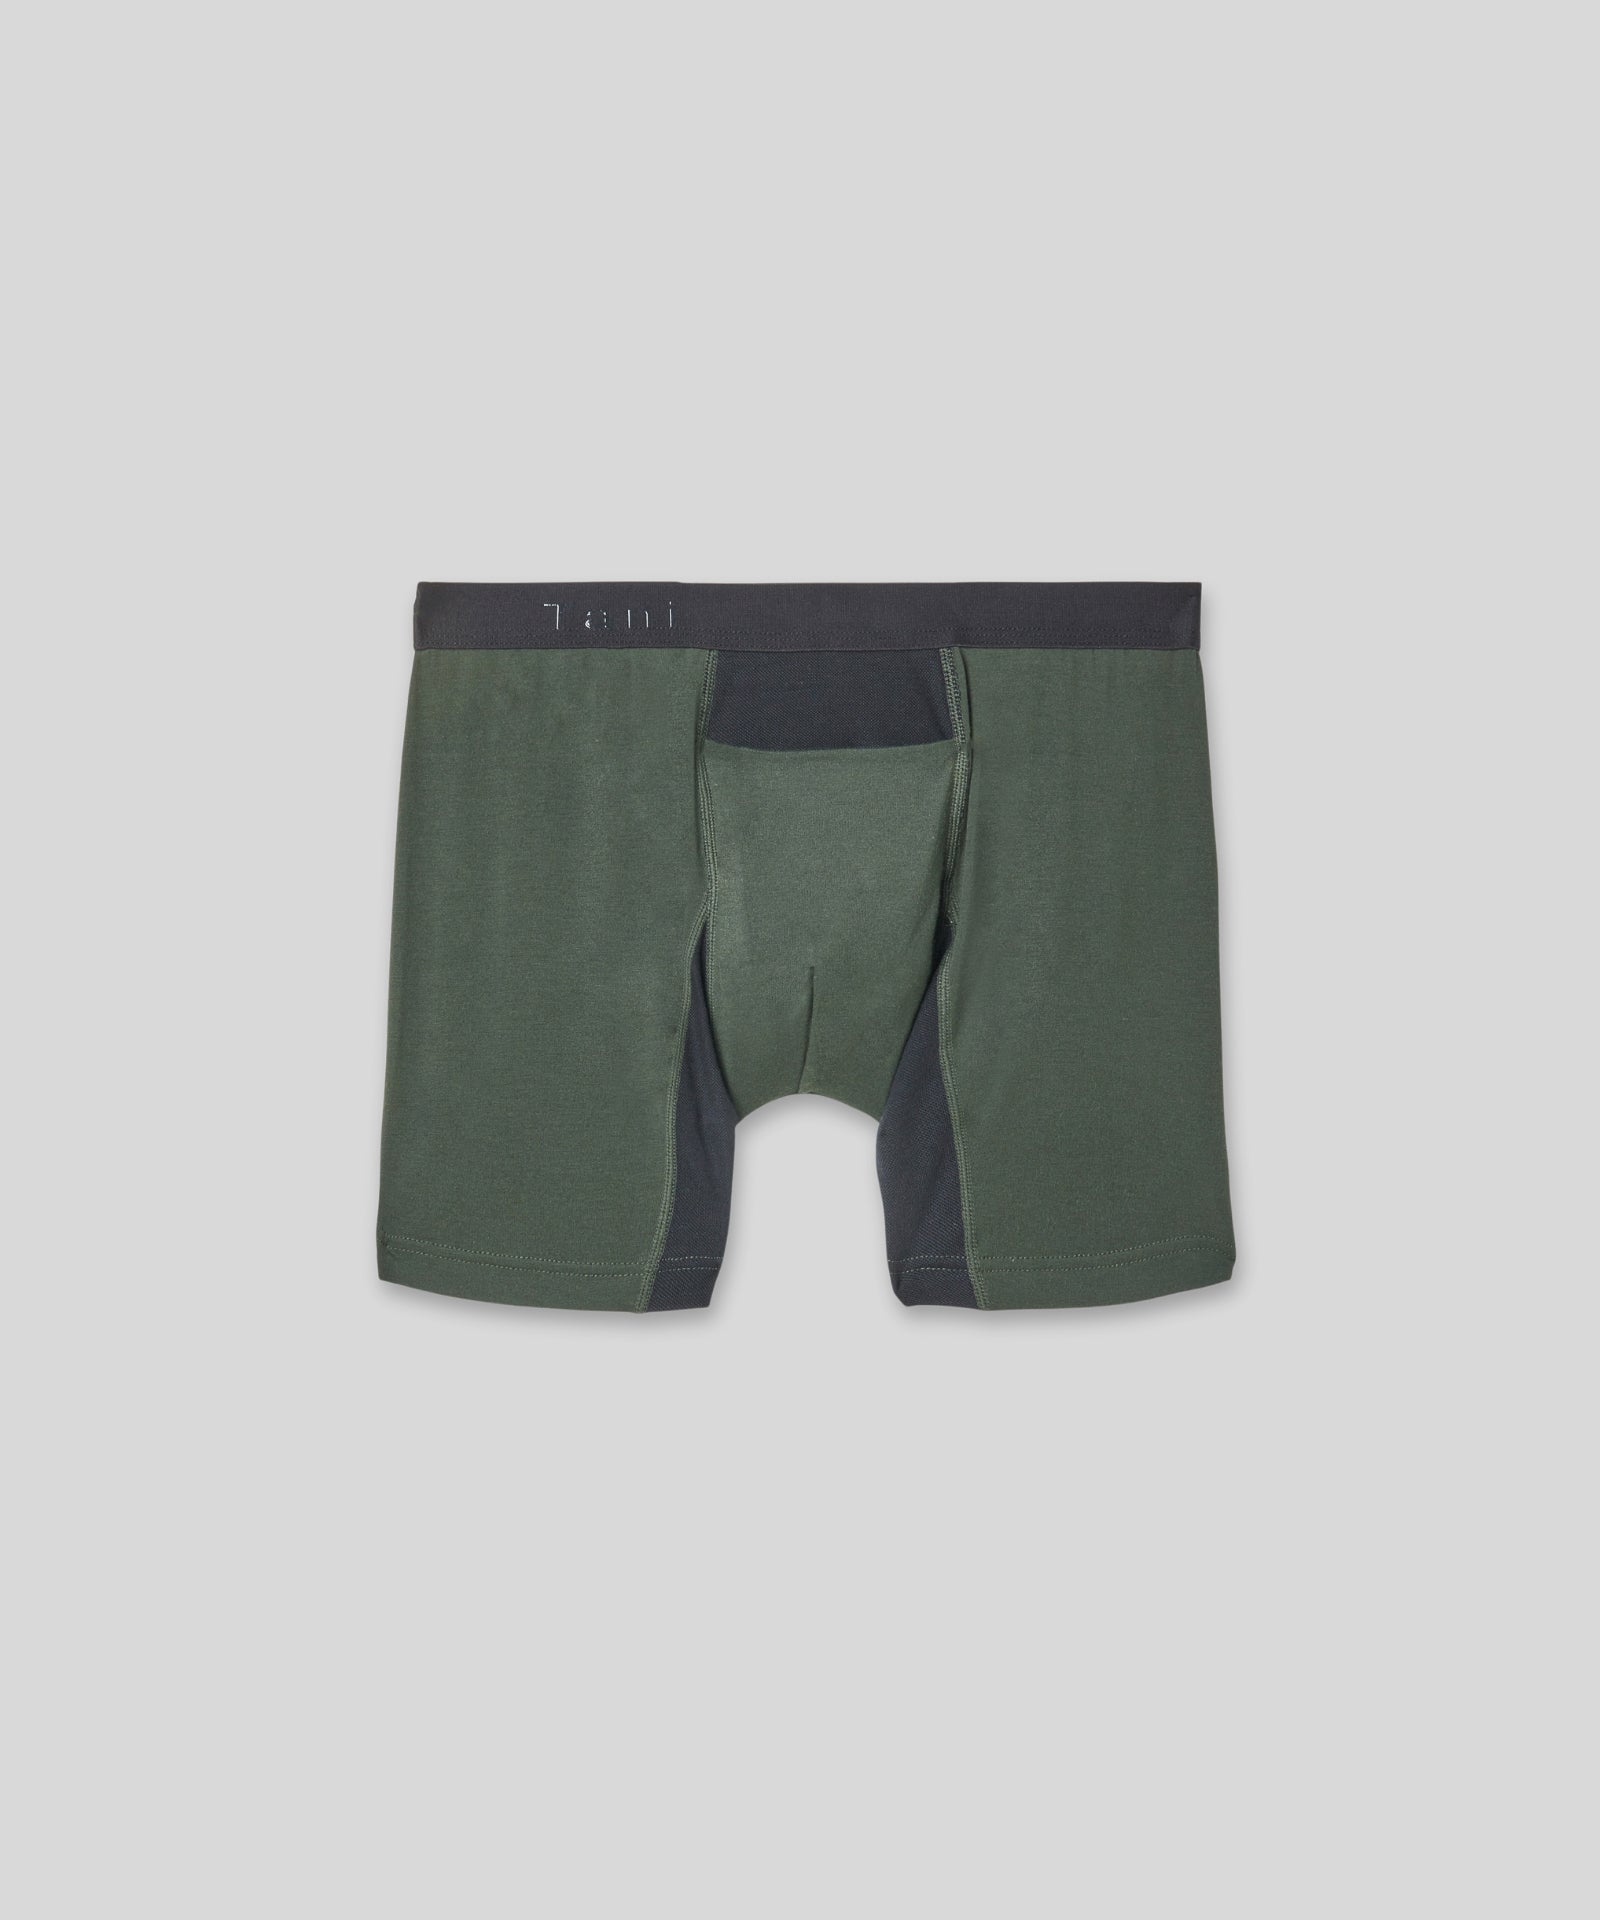 Mens Boxer Brief with Horizontal Fly in Green